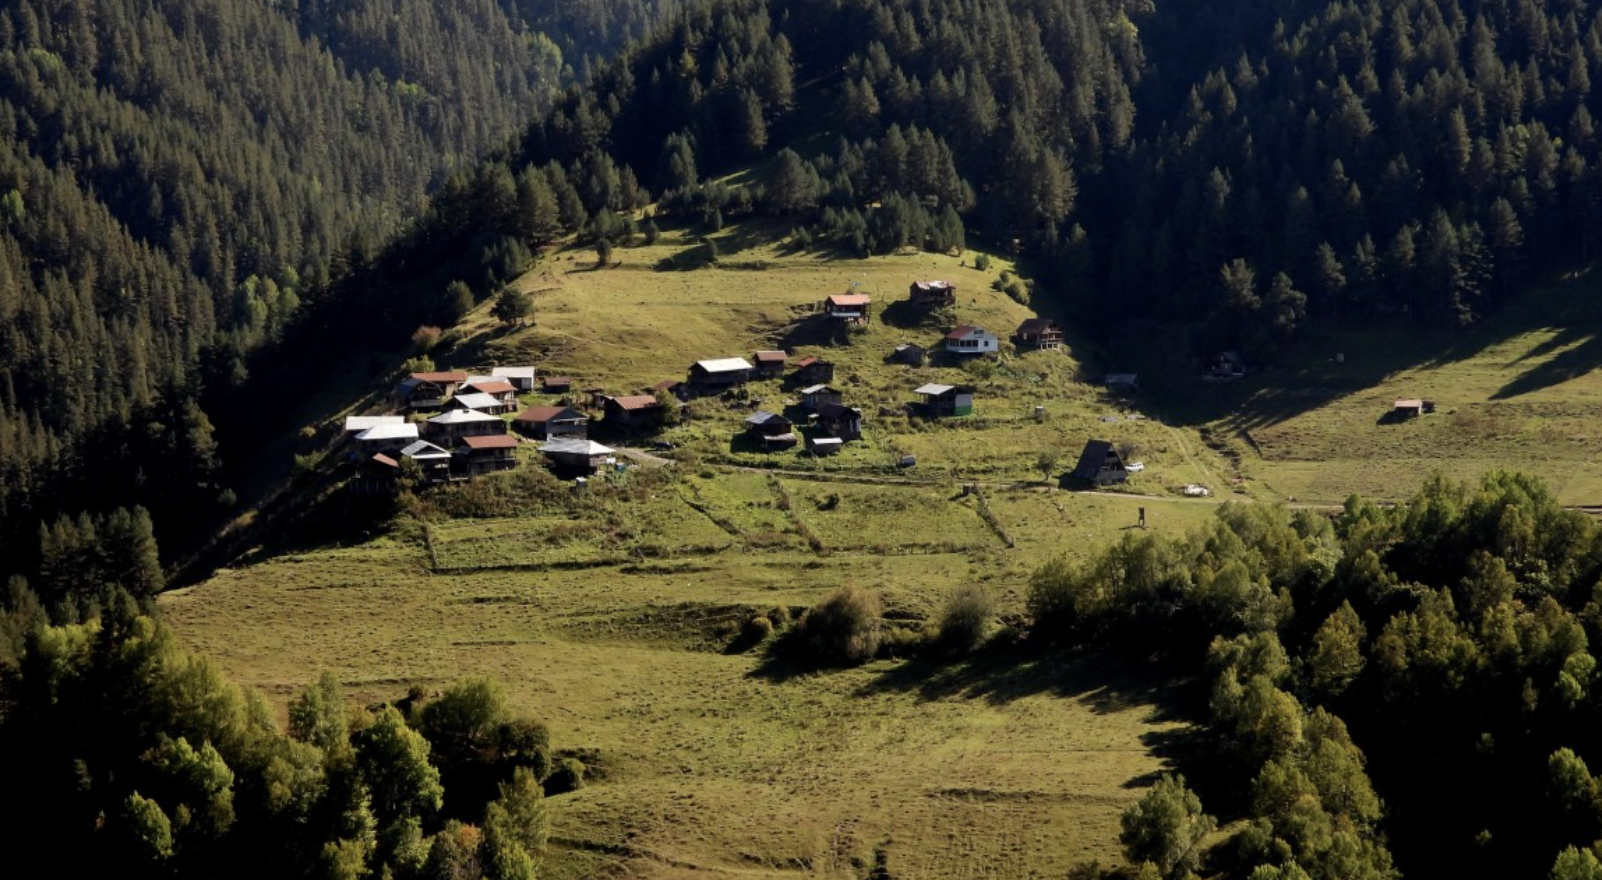 Settlements on a grassy mountain side with forests in the background